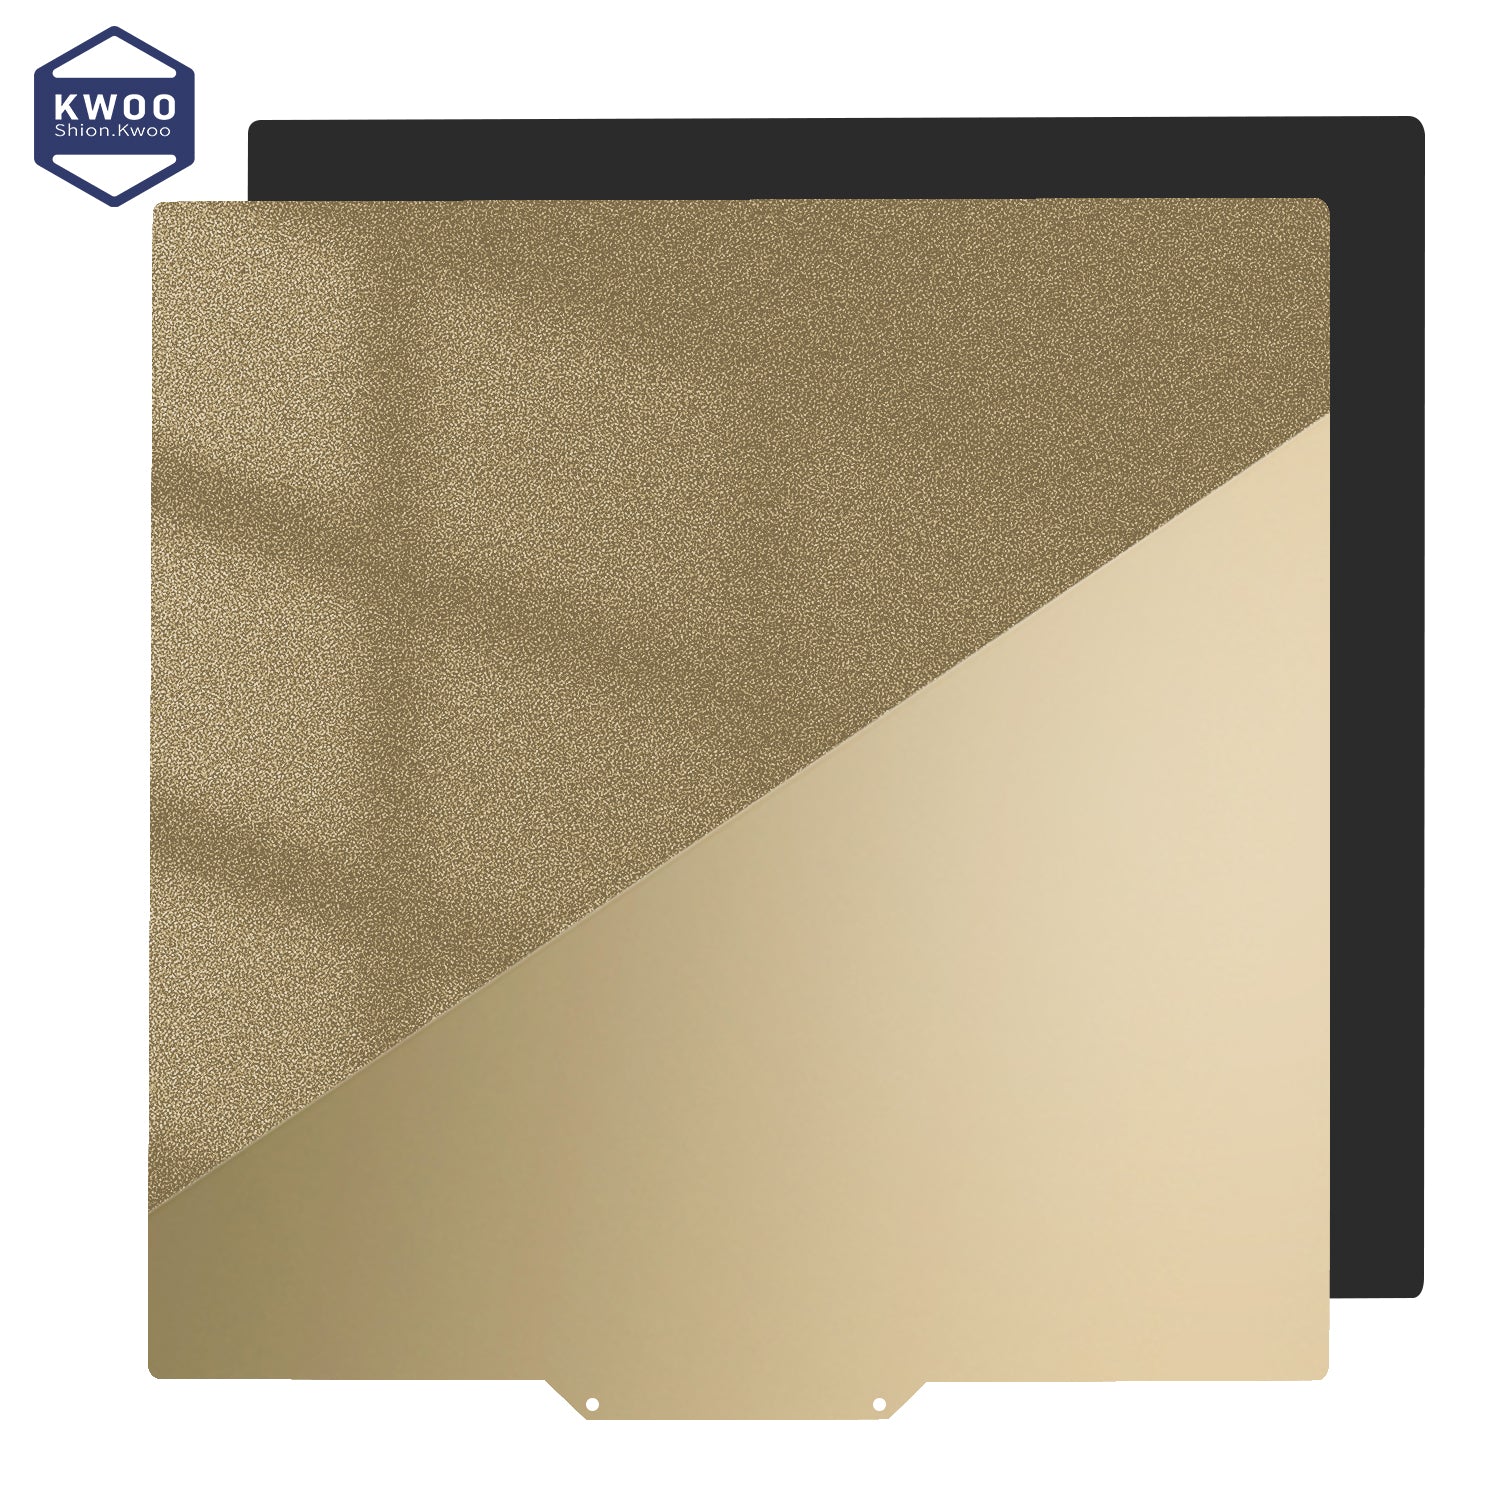 235x235mm/9.25x9.25 inch Double Sides Textured/Smooth PEI Sheet + 